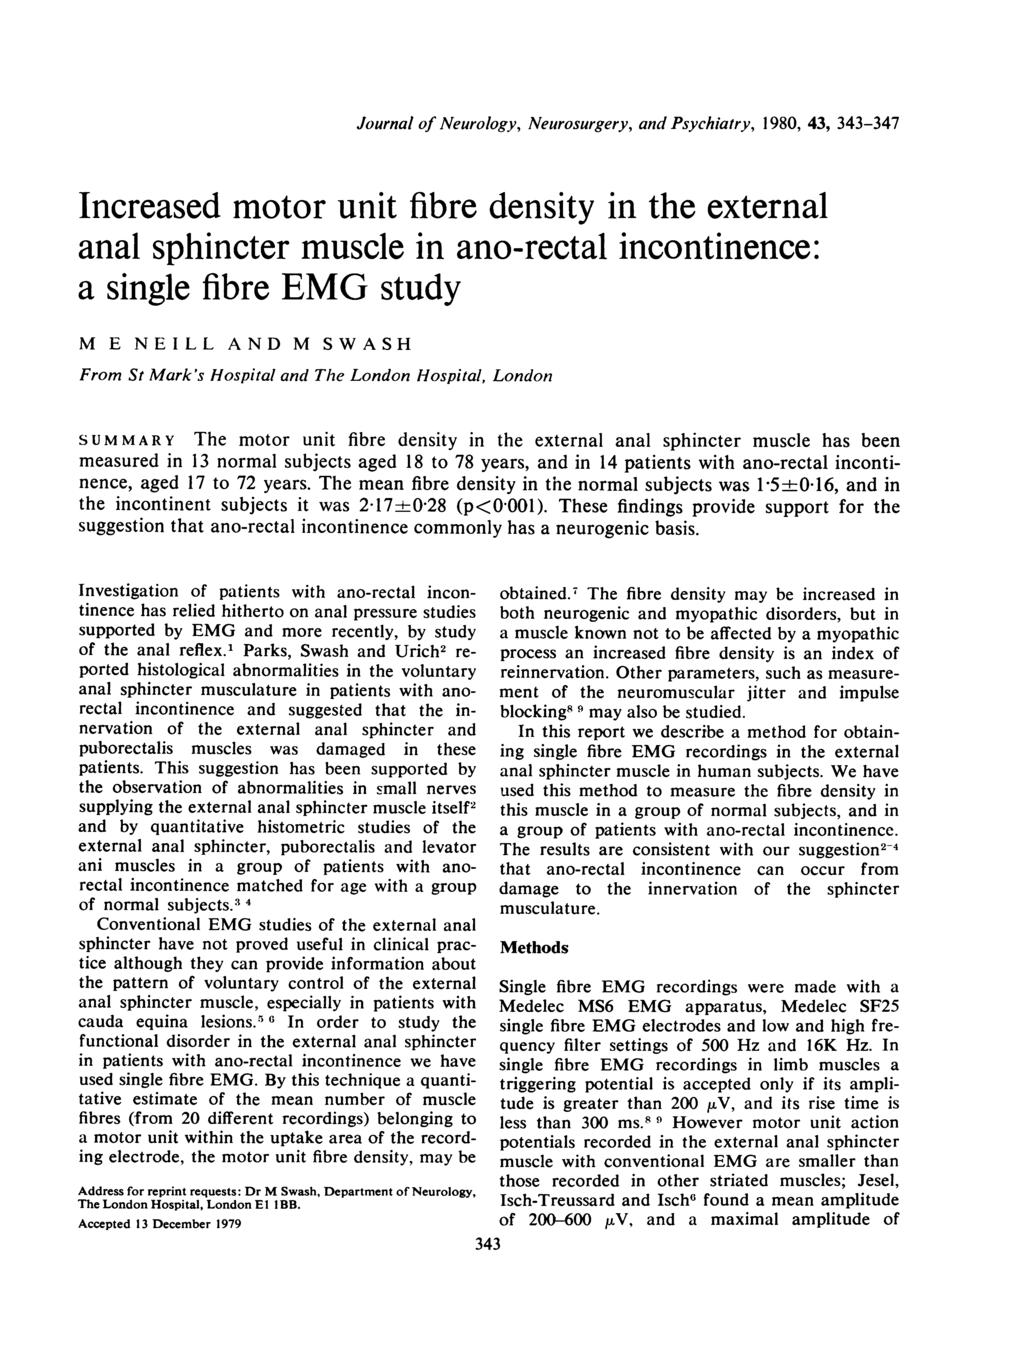 Journal of Neurology, Neurosurgery, and Psychiatry, 1980, 43, 343-347 Increased motor unit fibre density in the external anal sphincter muscle in ano-rectal incontinence: a single fibre EMG study M E